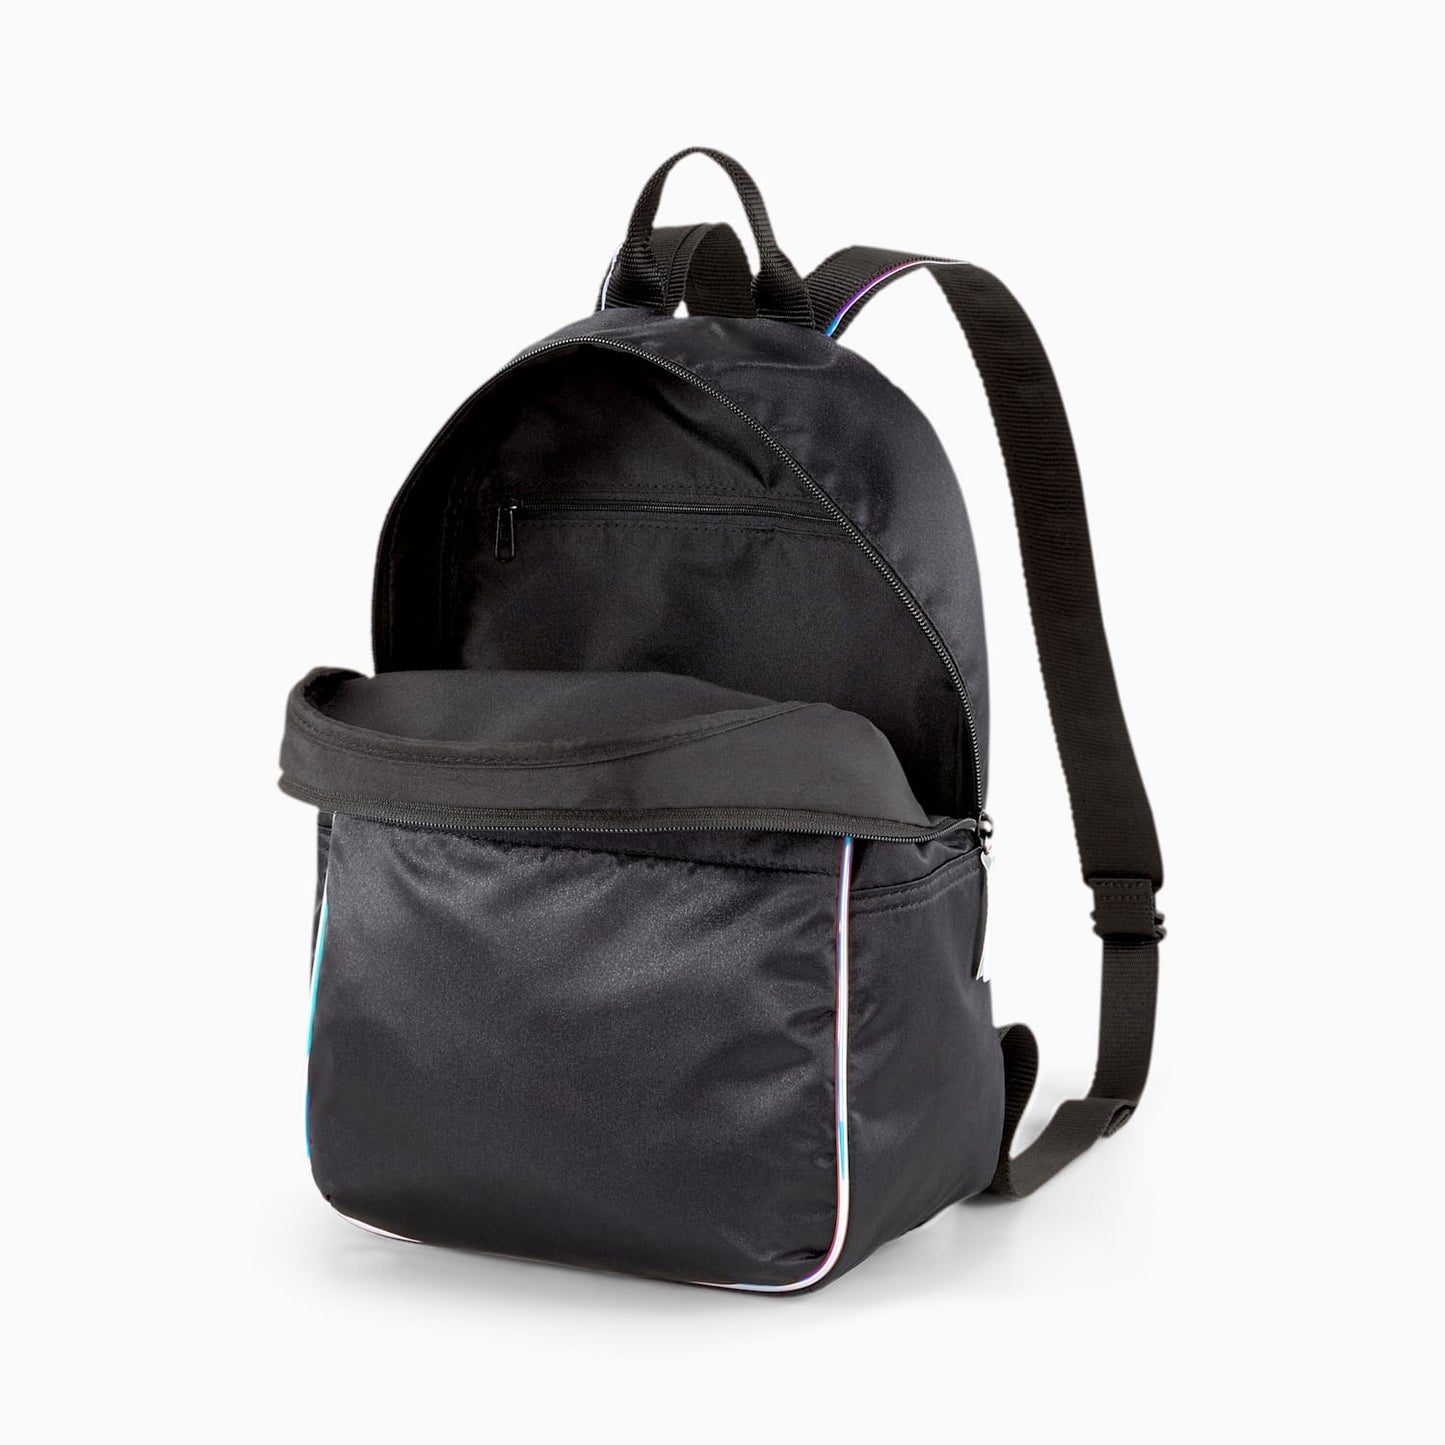 Prime Time Women's Backpack-076985 01